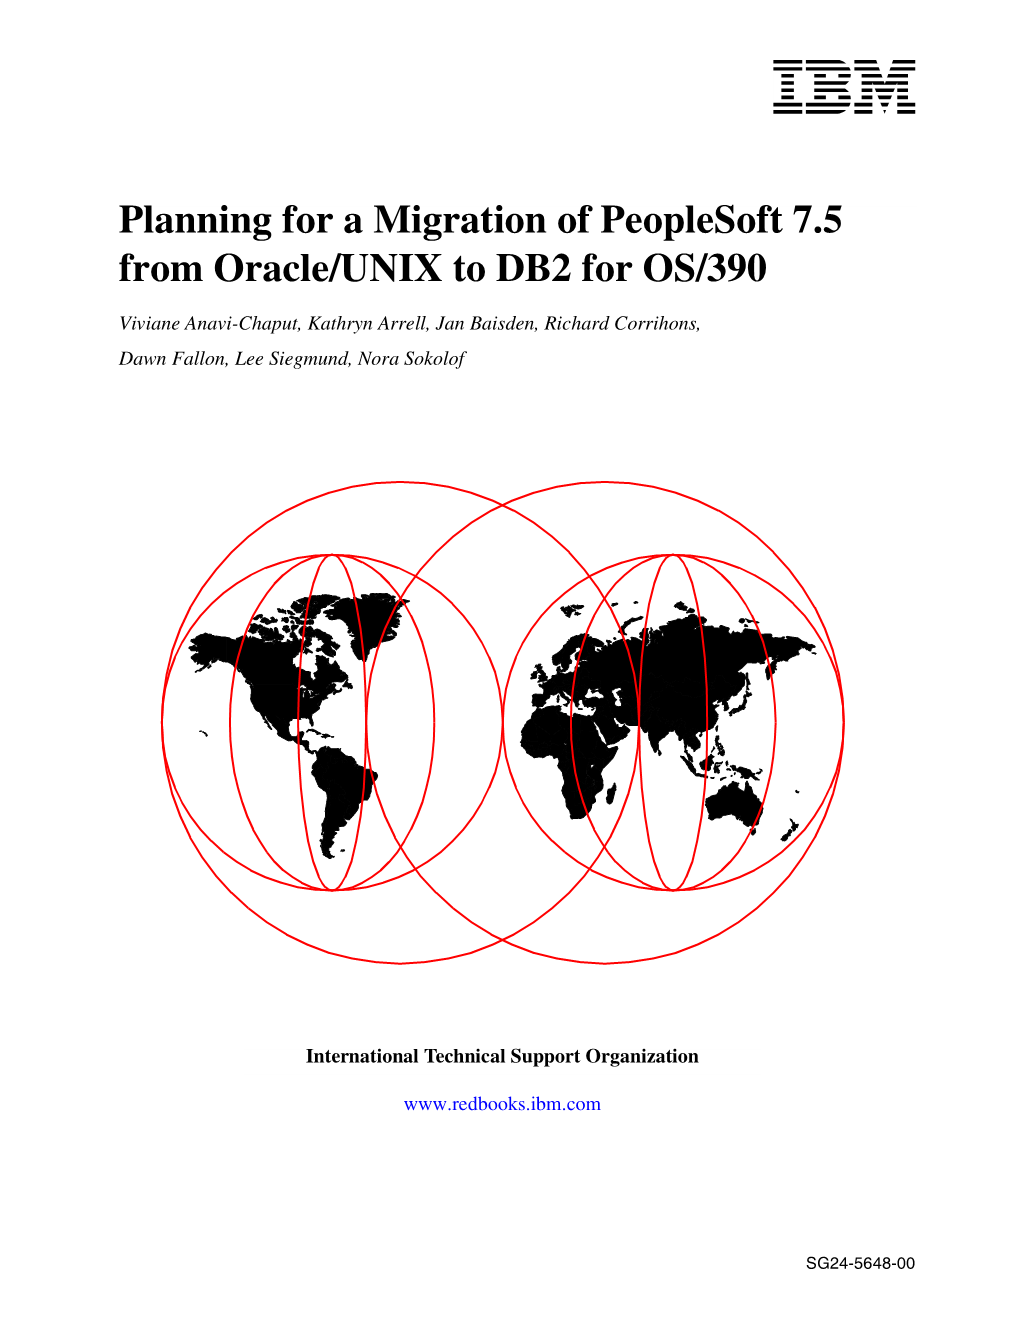 Planning for a Migration of Peoplesoft 7.5 from Oracle/UNIX to DB2 for OS/390